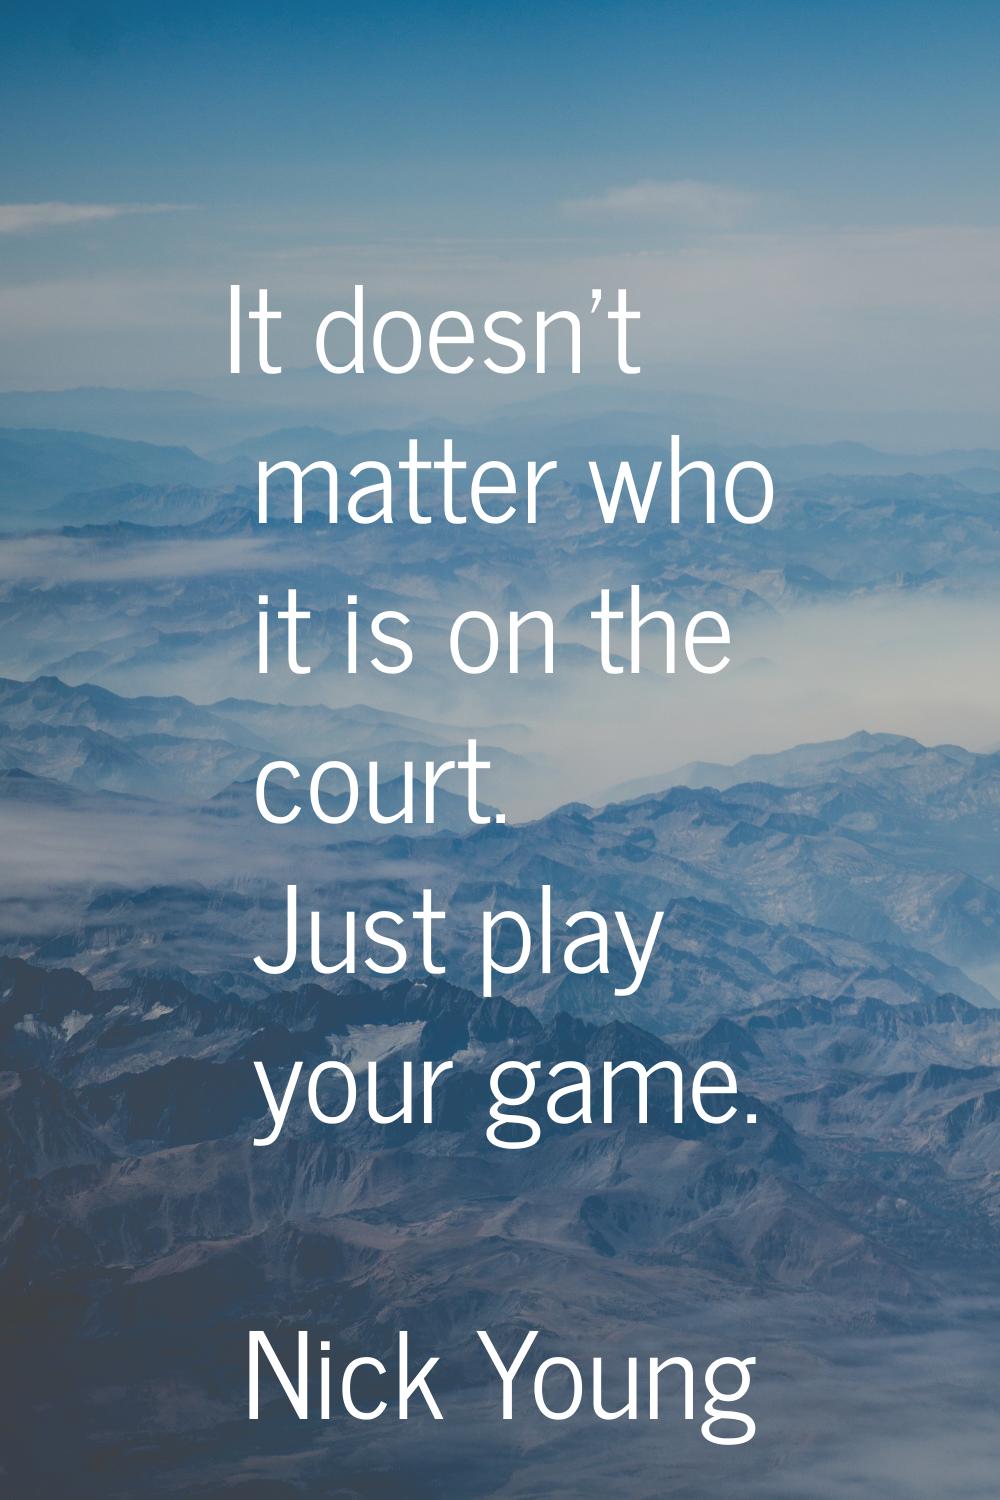 It doesn't matter who it is on the court. Just play your game.